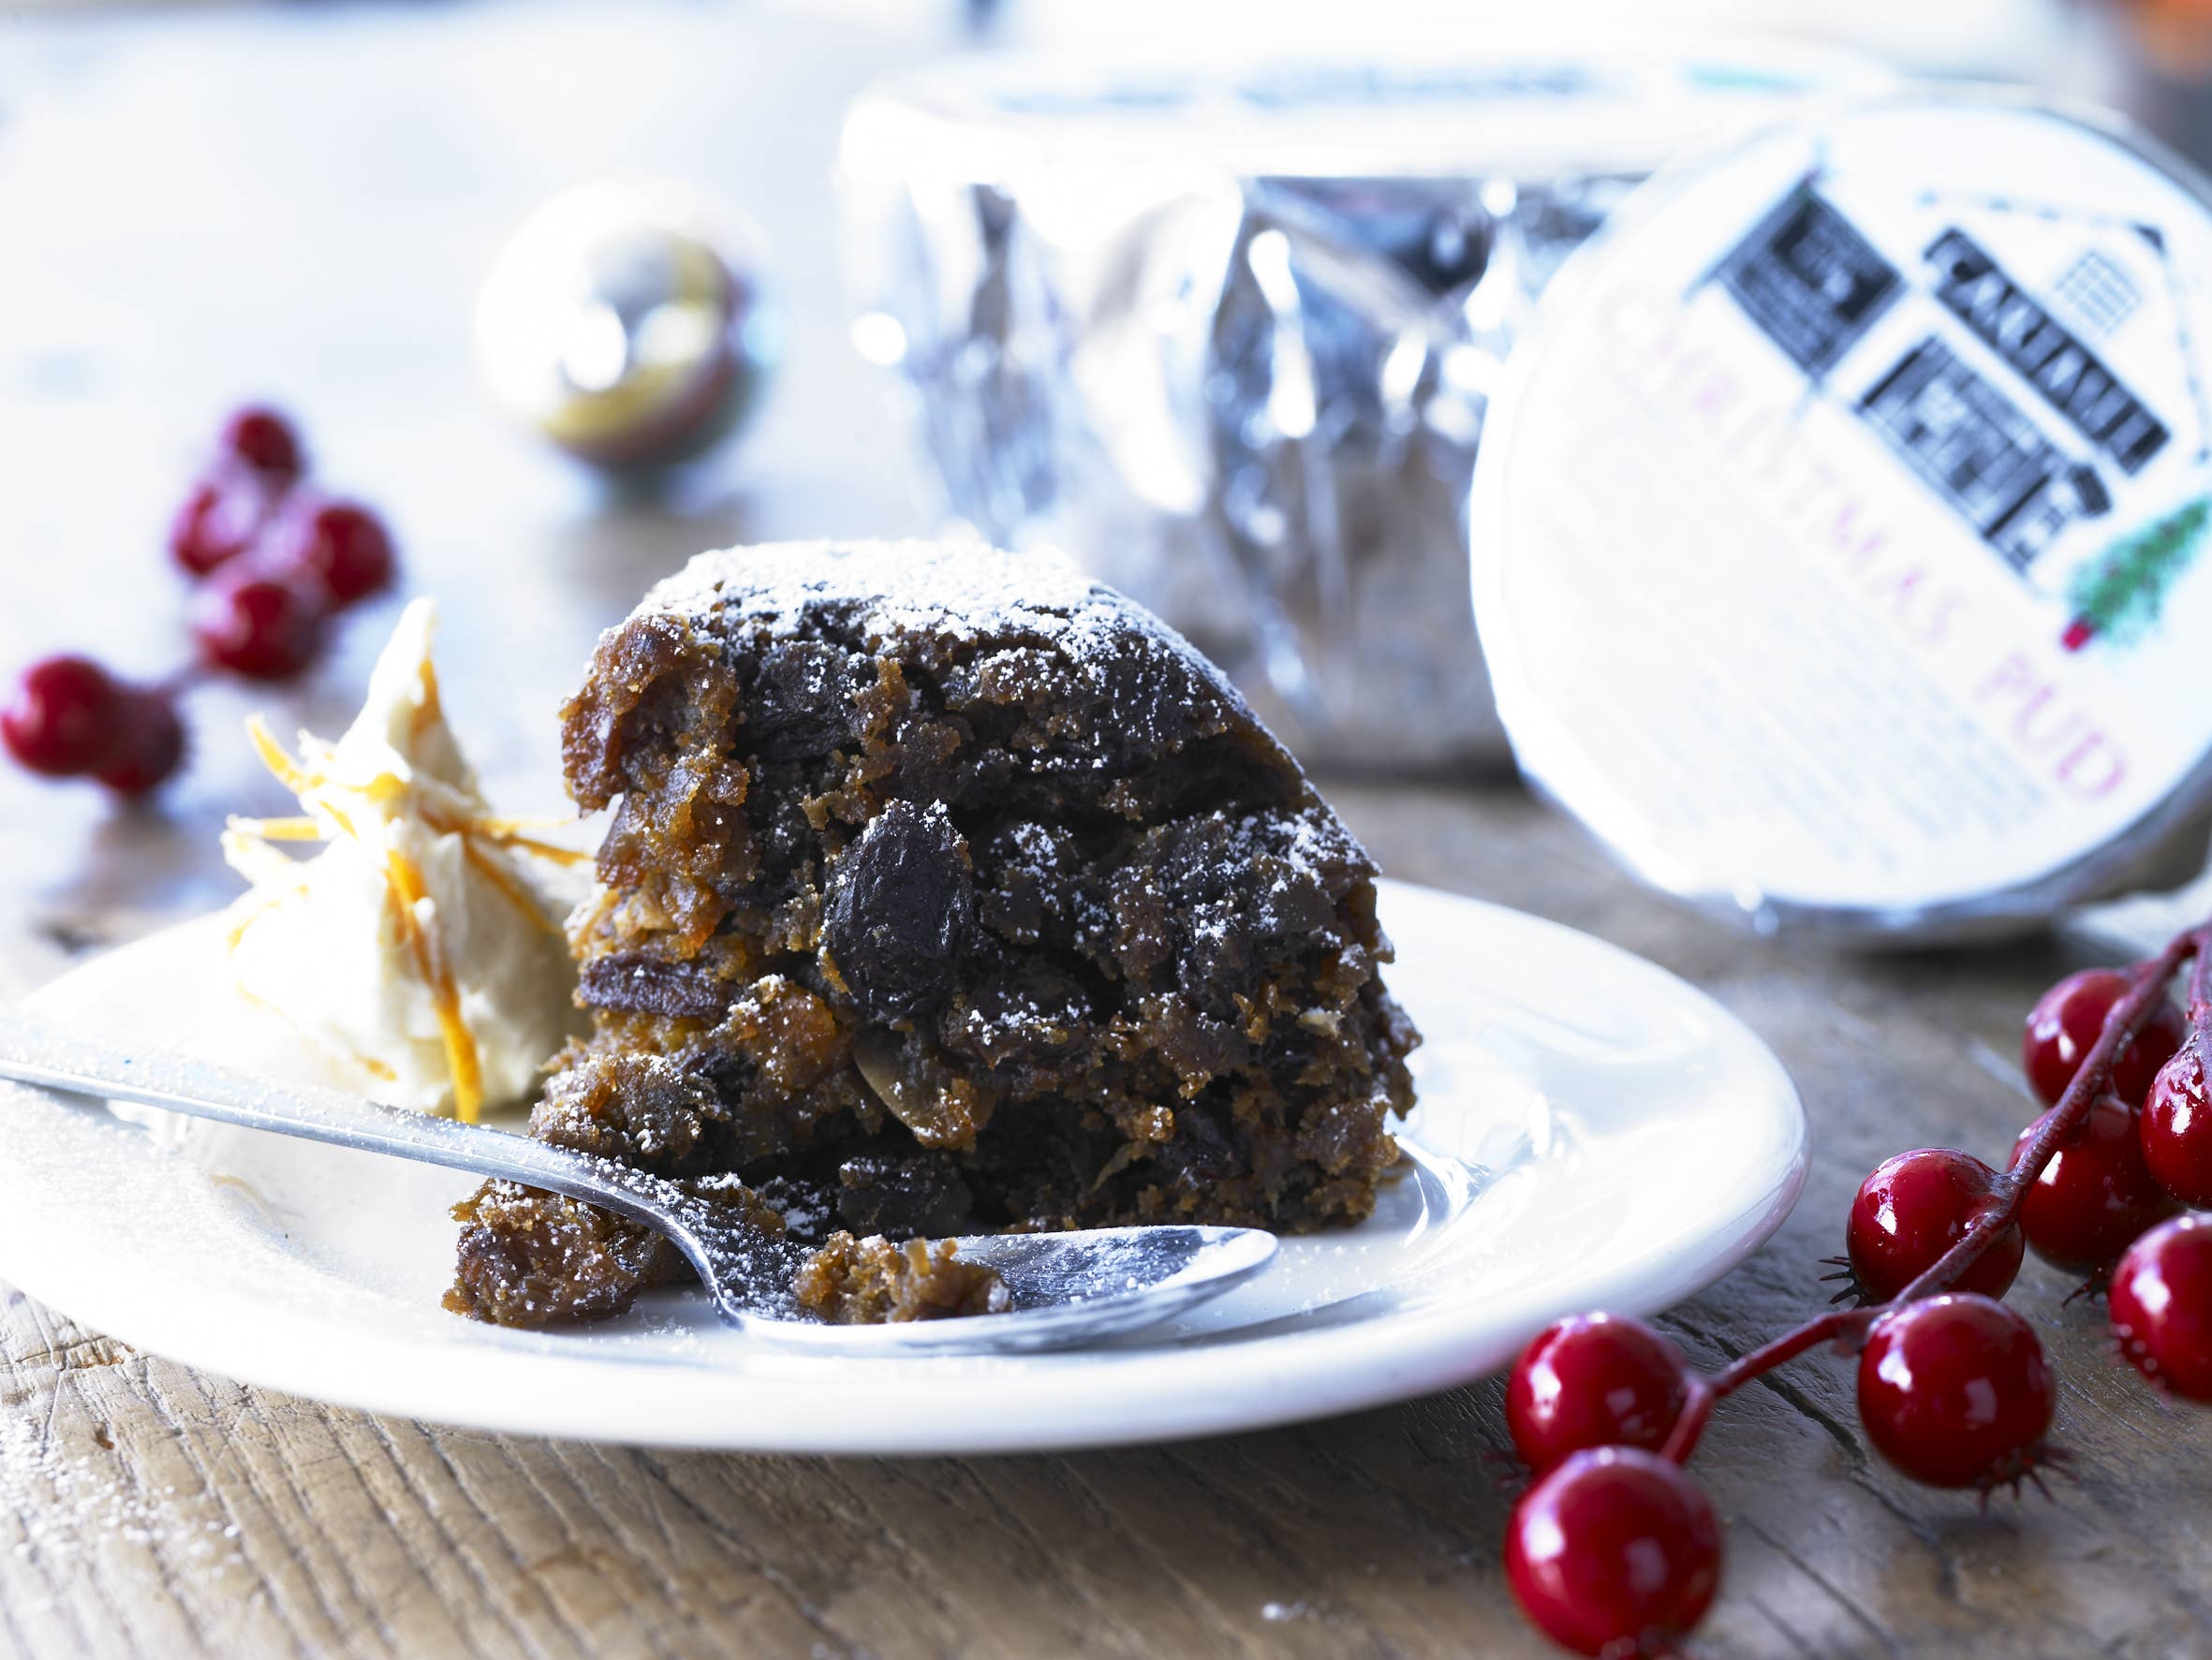 Traditional Christmas Pudding- Celebrate the holiday with a pudding